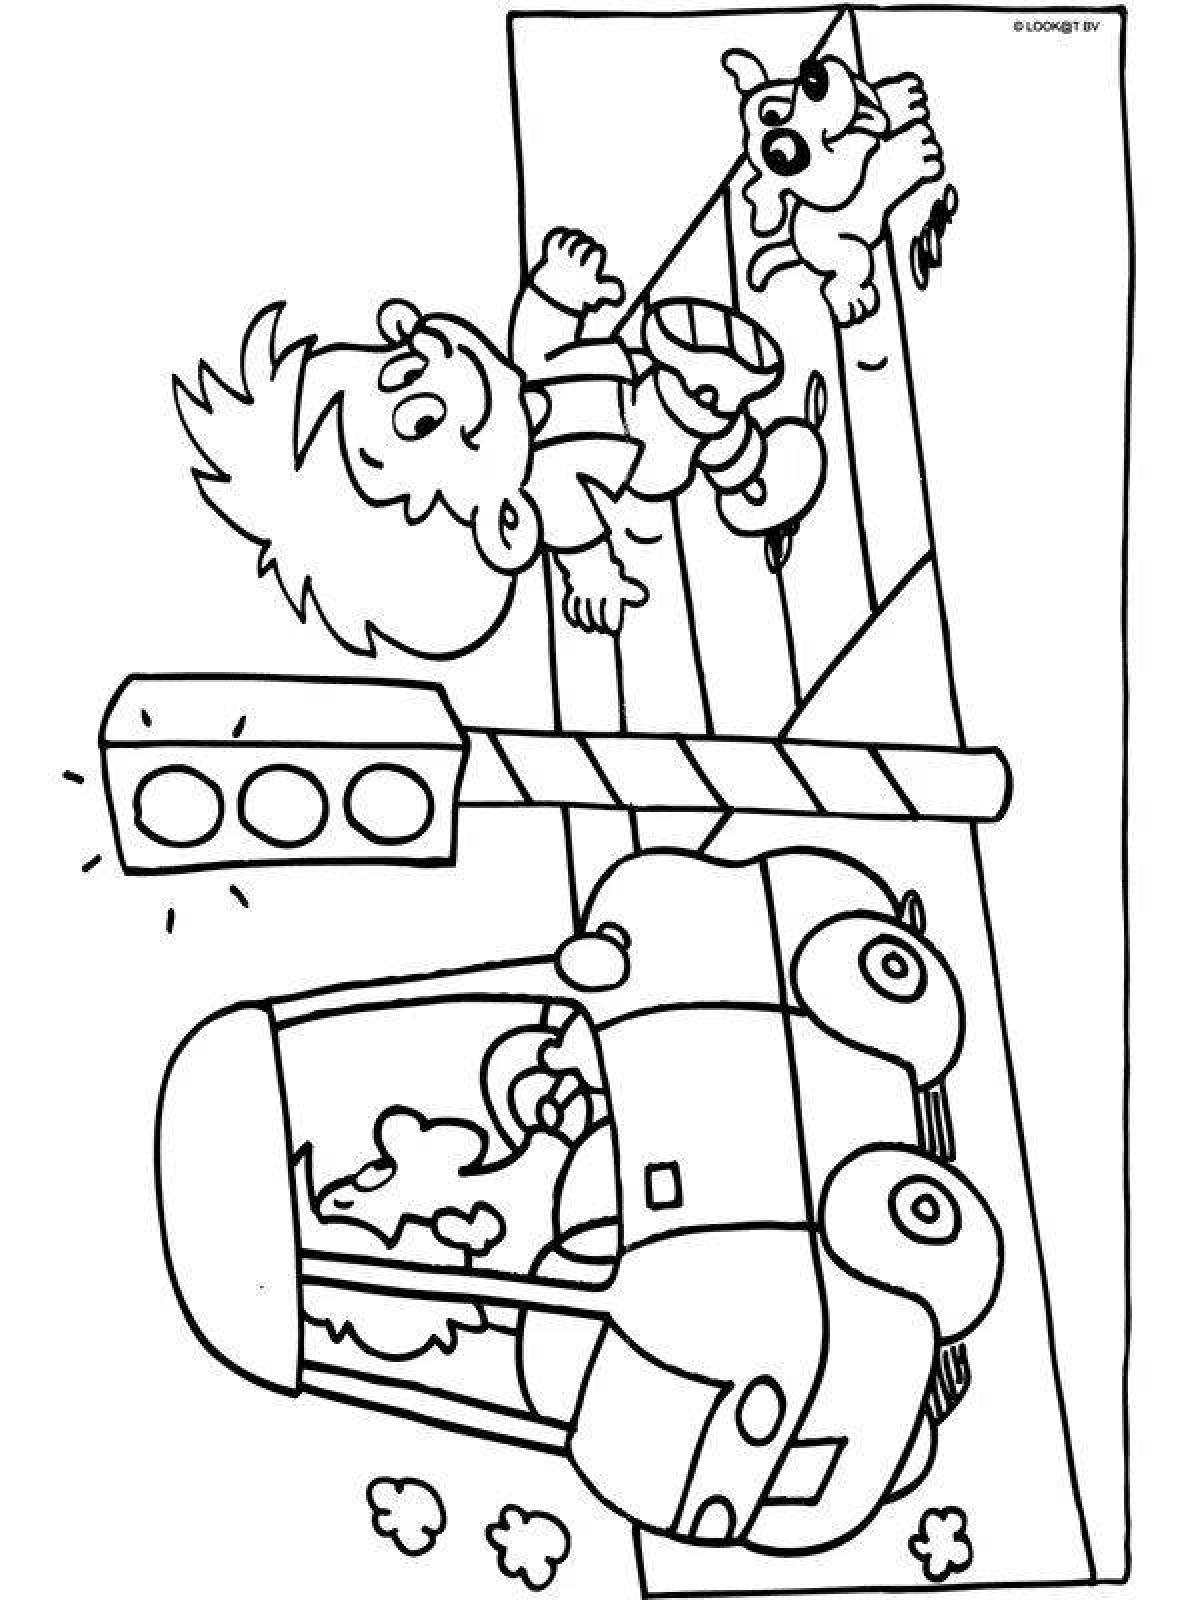 Colorful rules of the road coloring pages for kids